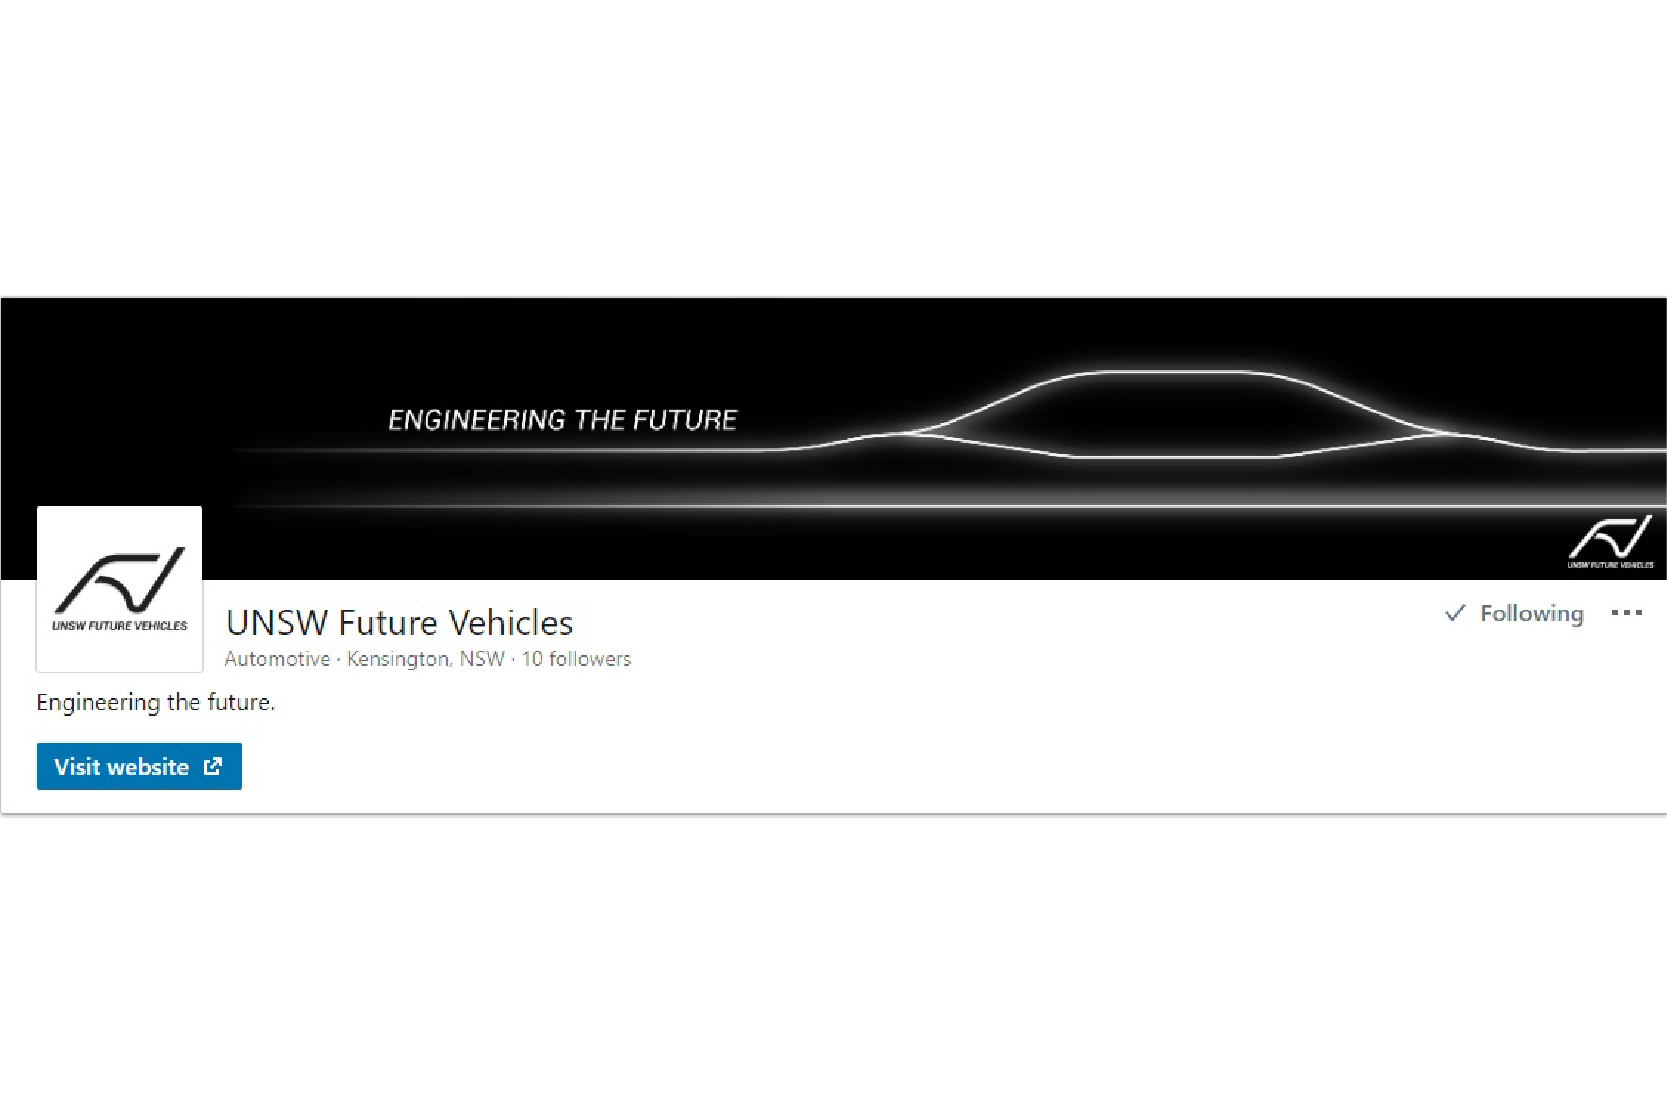 Image 4 of UNSW Future Vehicles